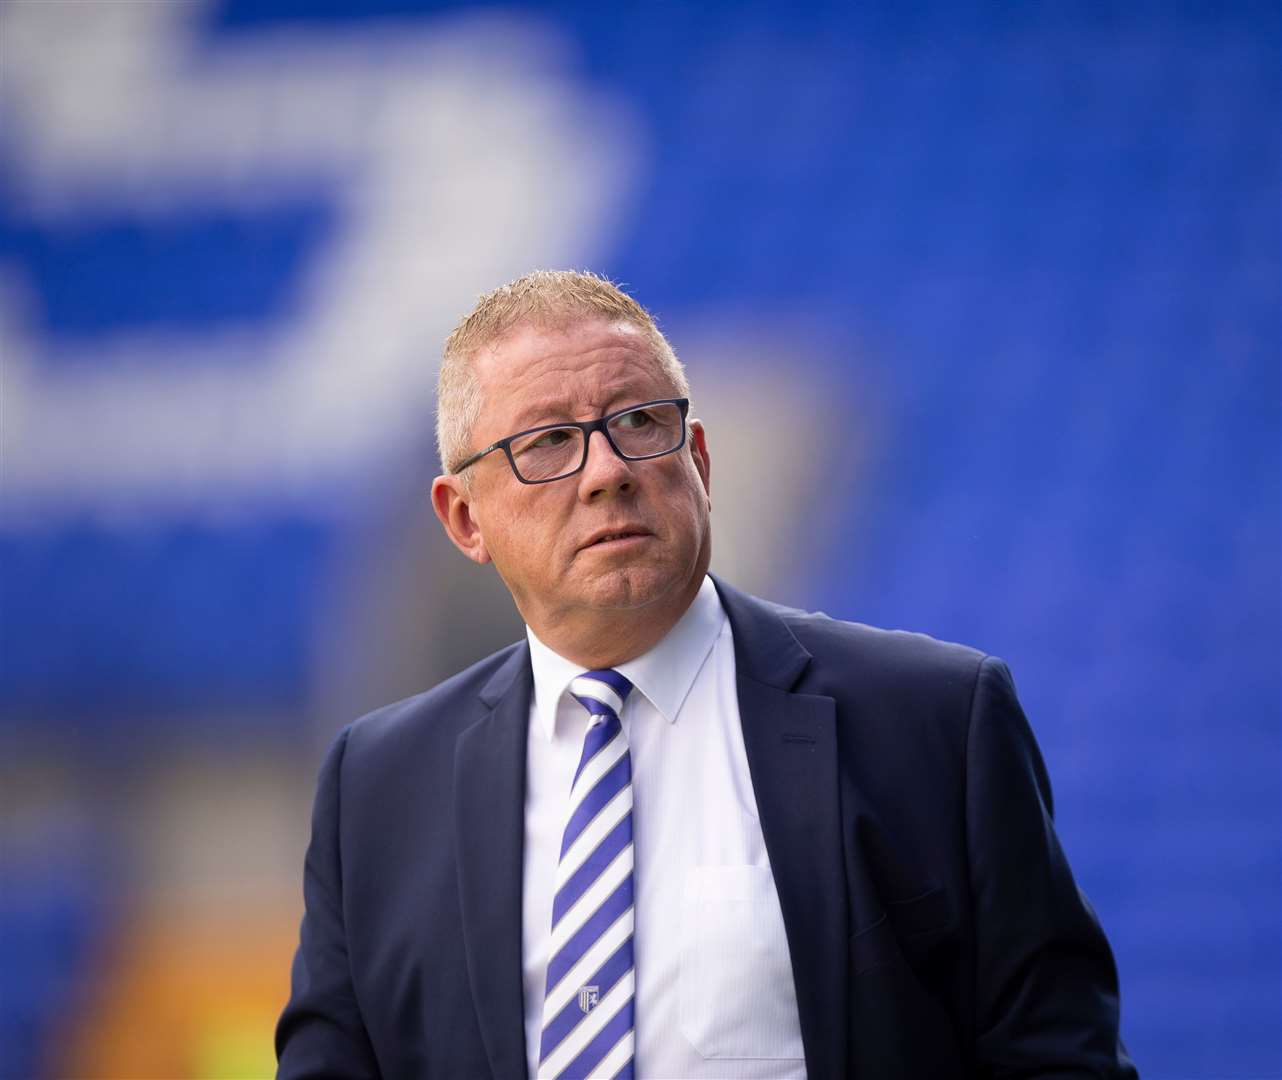 Gillingham chairman Paul Scally suggests he will take action over false claims